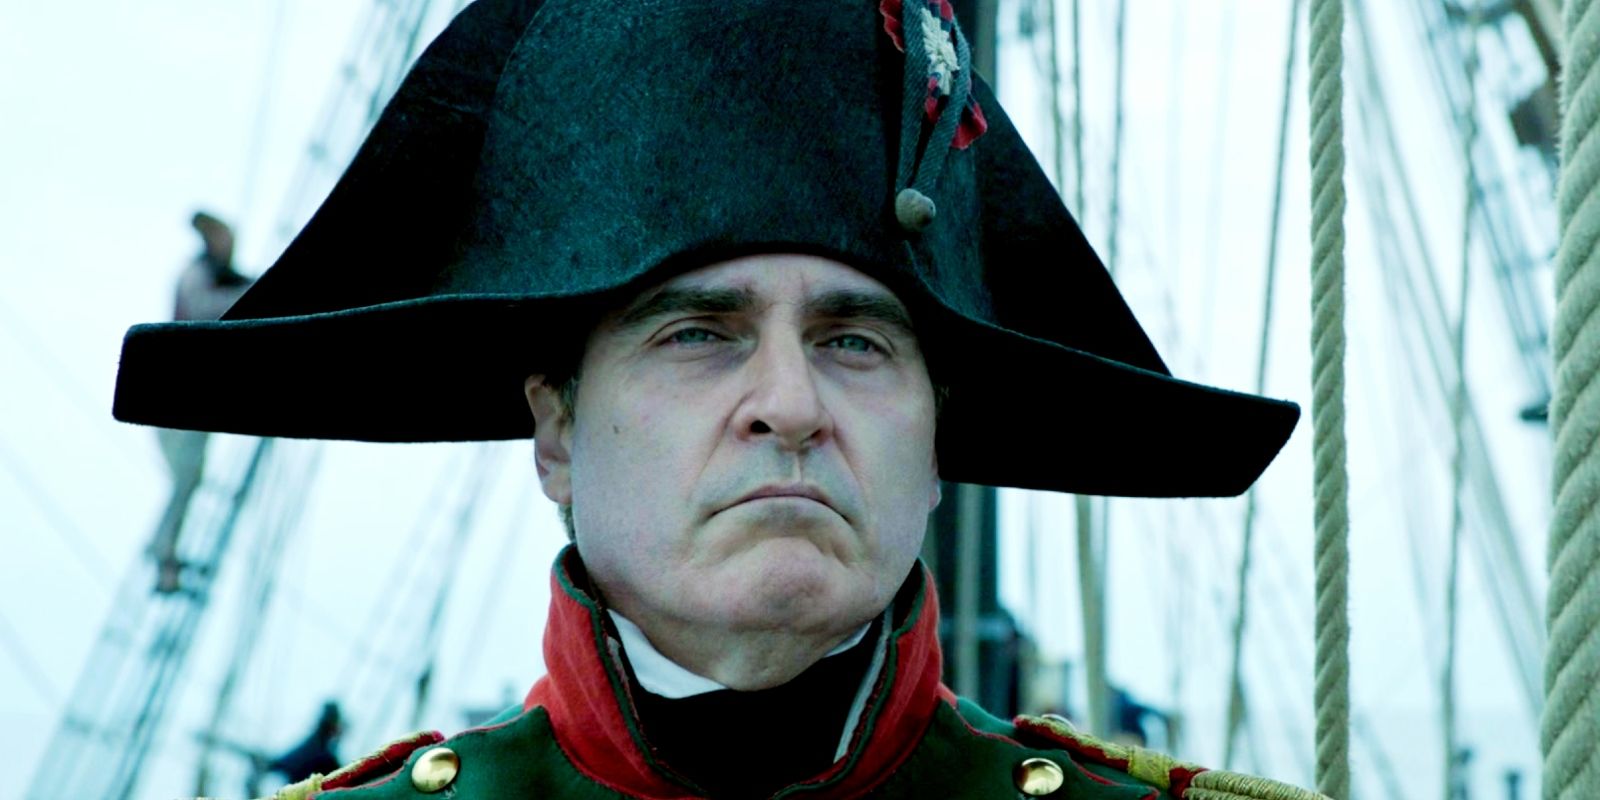 ridley-scott’s-napoleon-streaming-release-date-revealed